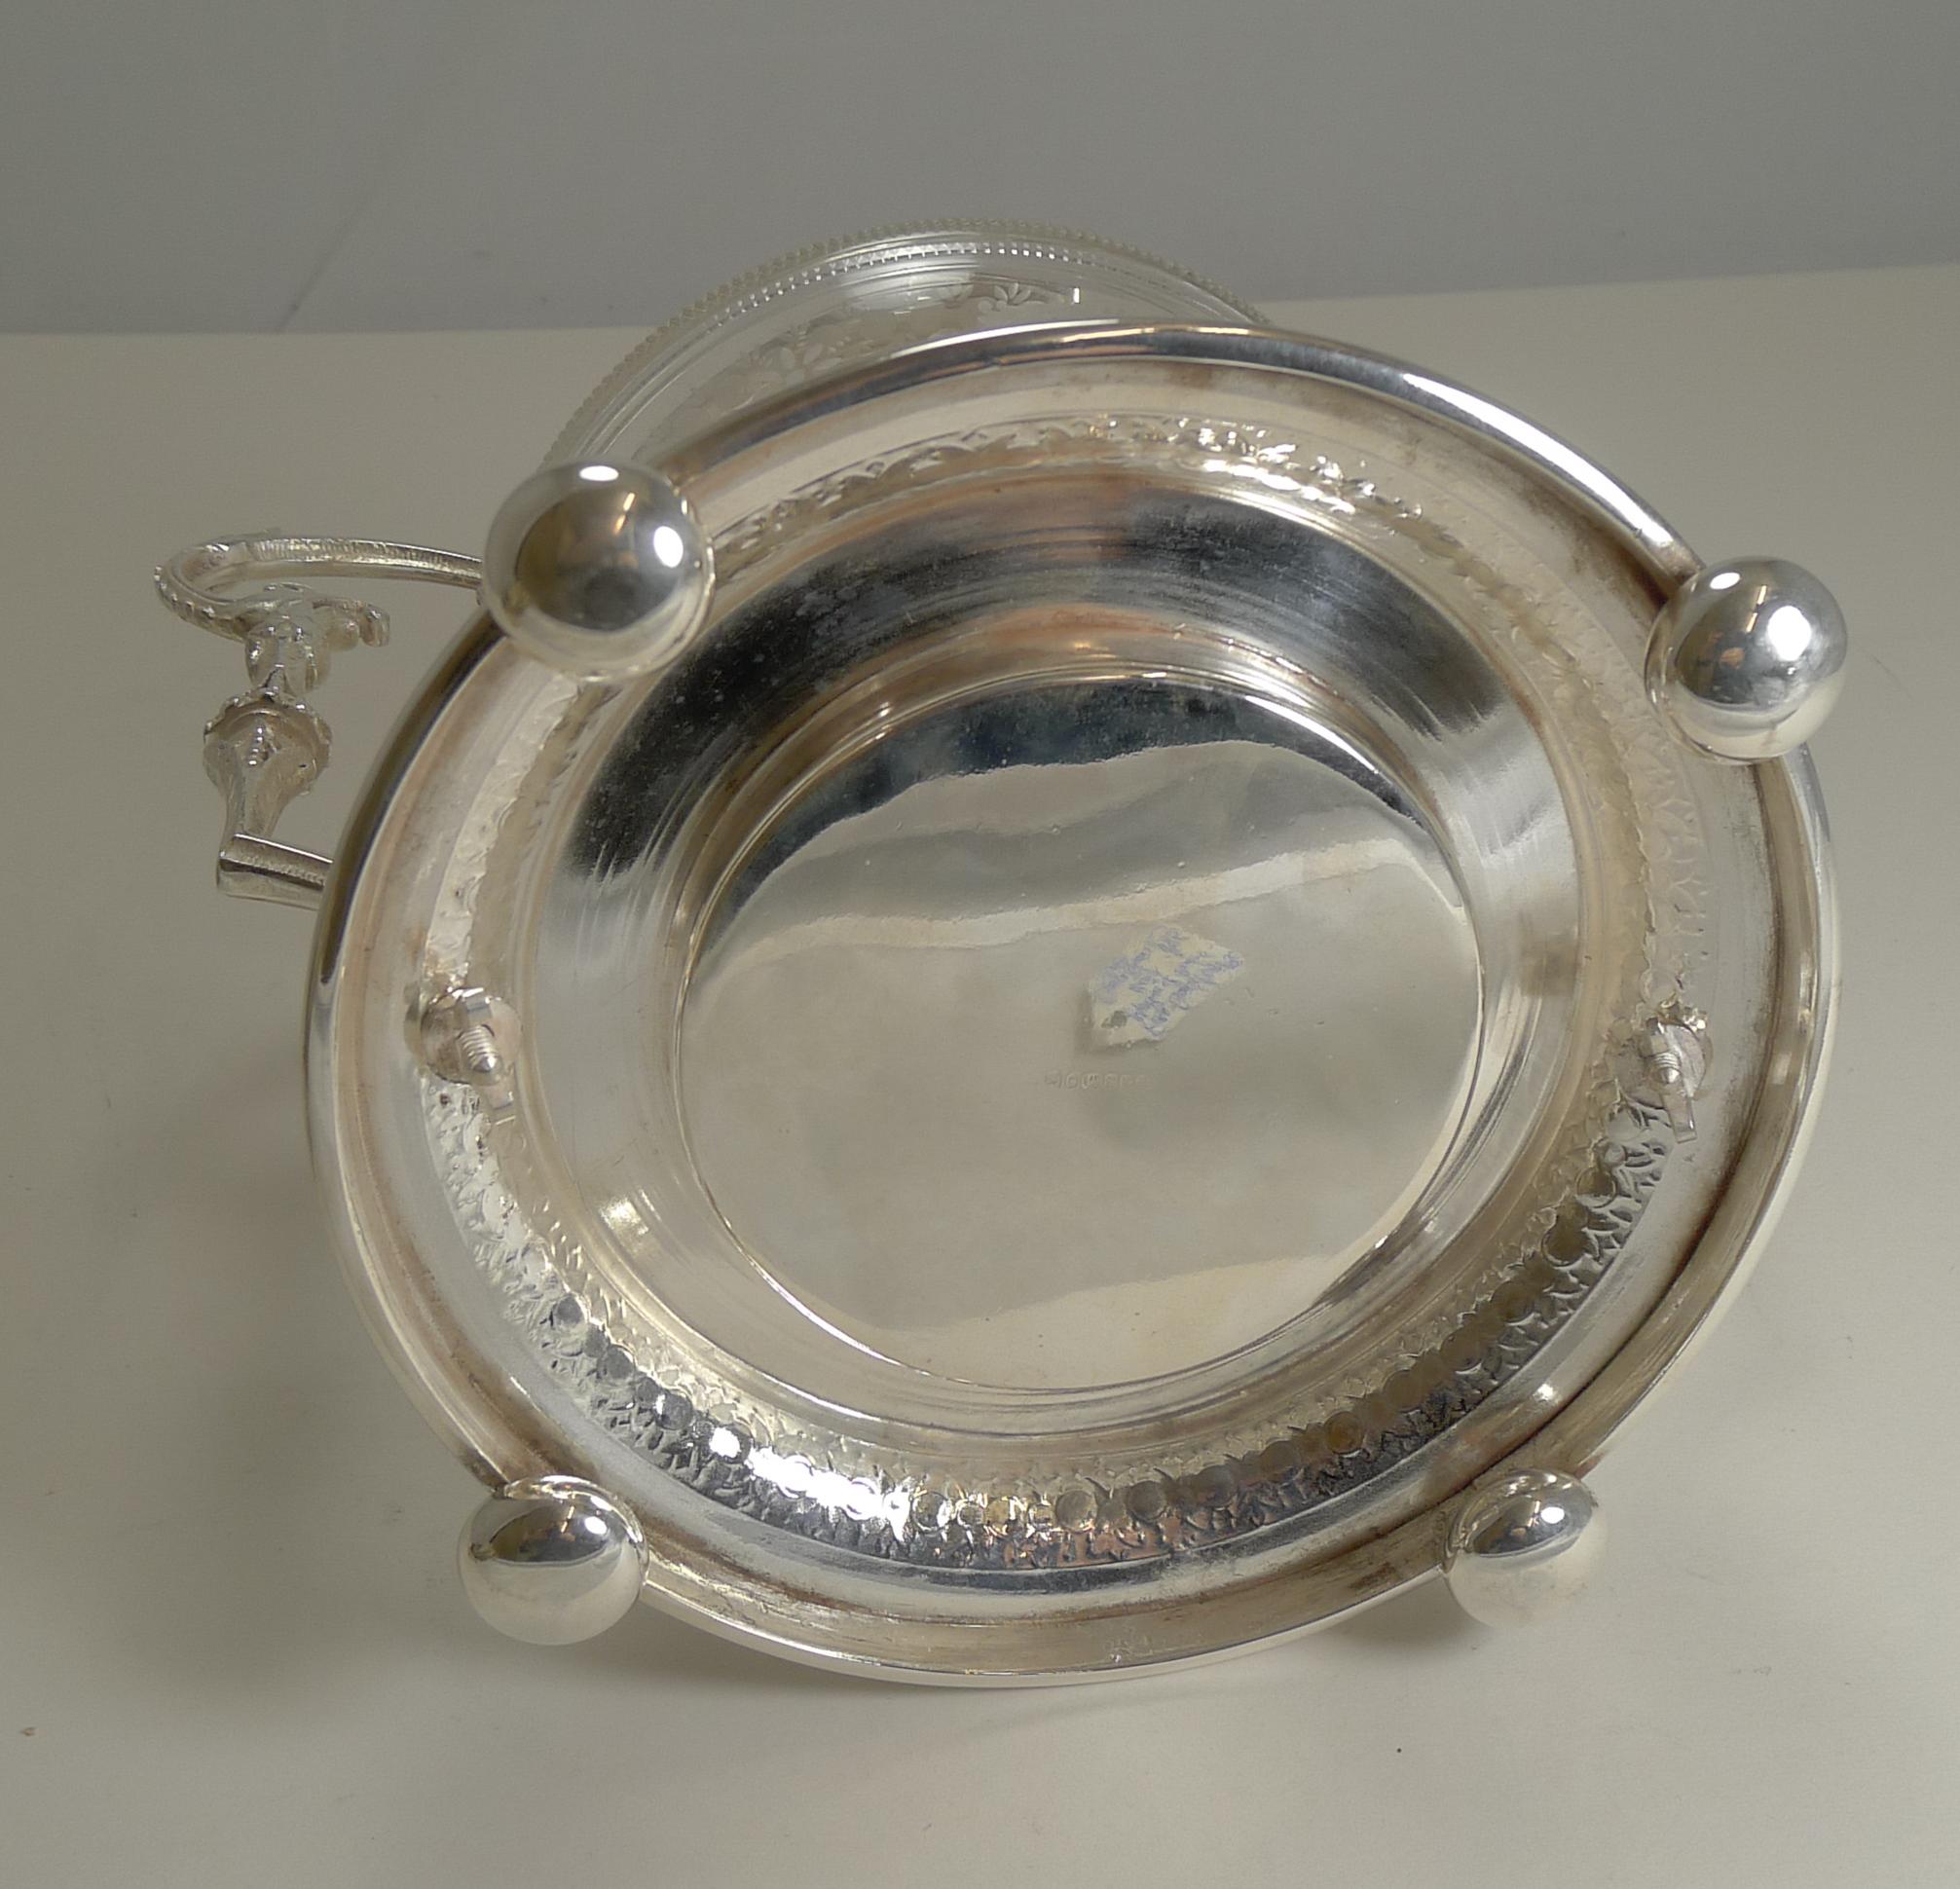 The photographs of this grand biscuit box do not do the piece justice. The glass and silver plated fittings (including the footed base) are all fitted together, the base holding the glass and bolted into place on the underside.

The four original